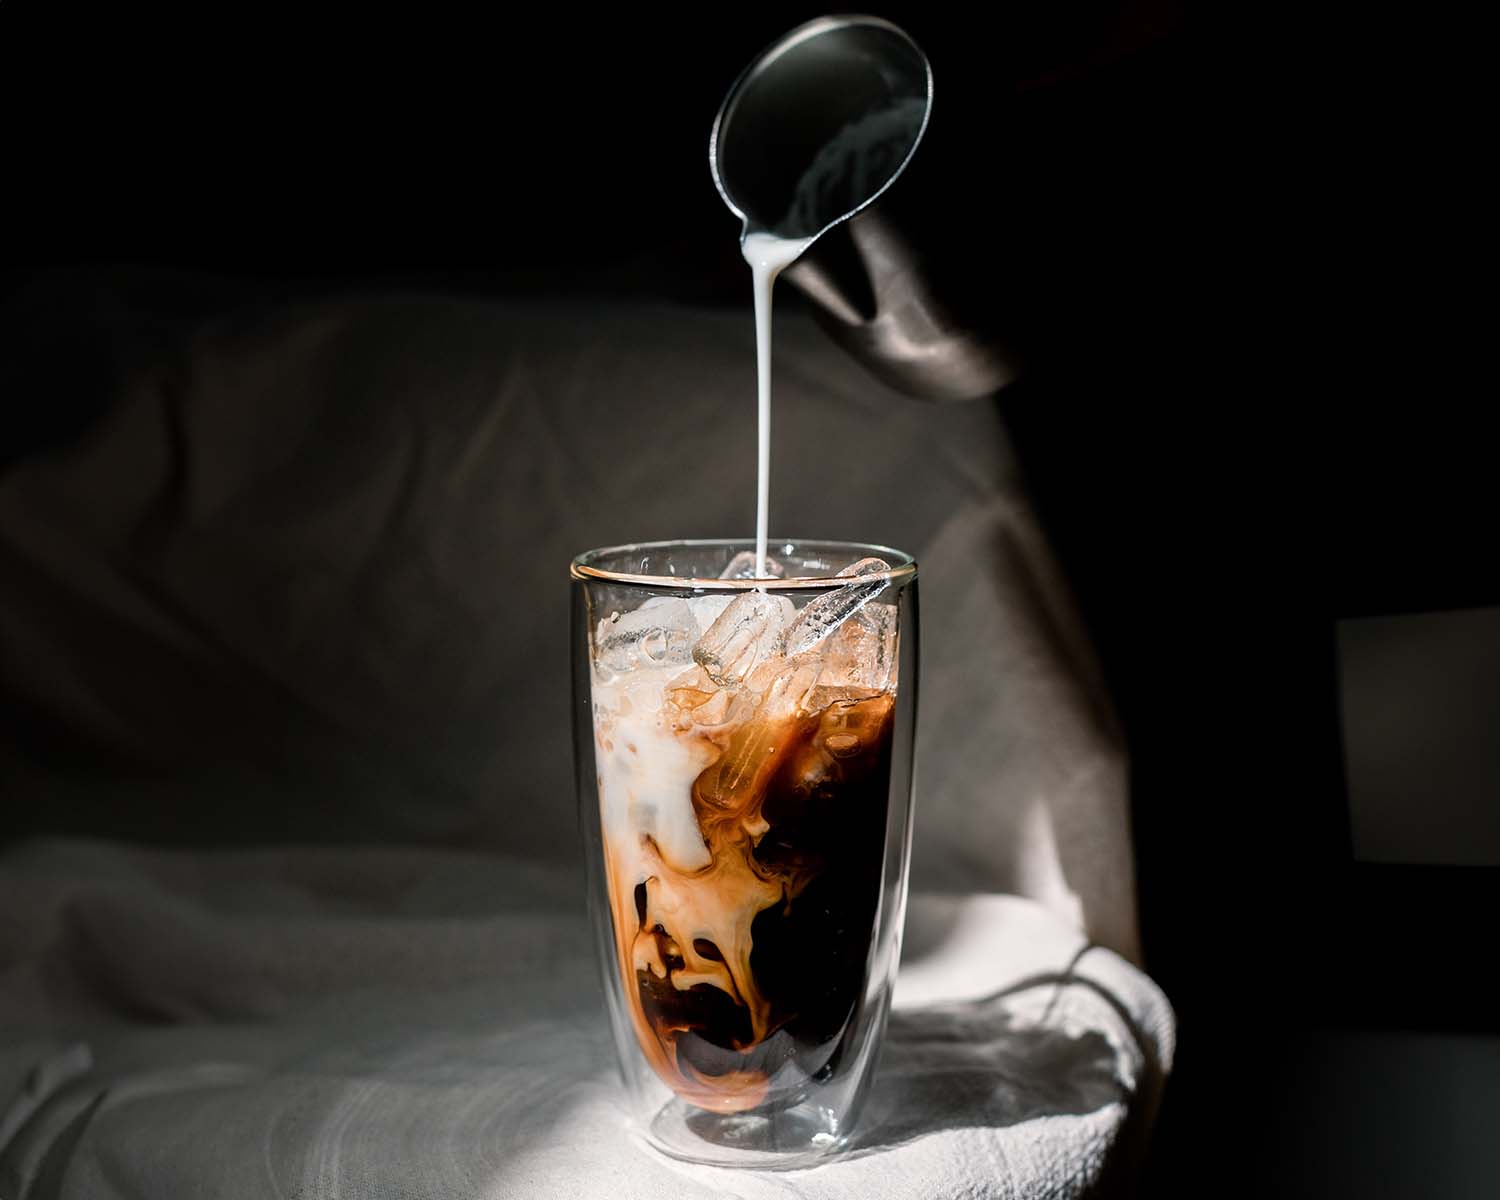 milk being poured over coffee with ice